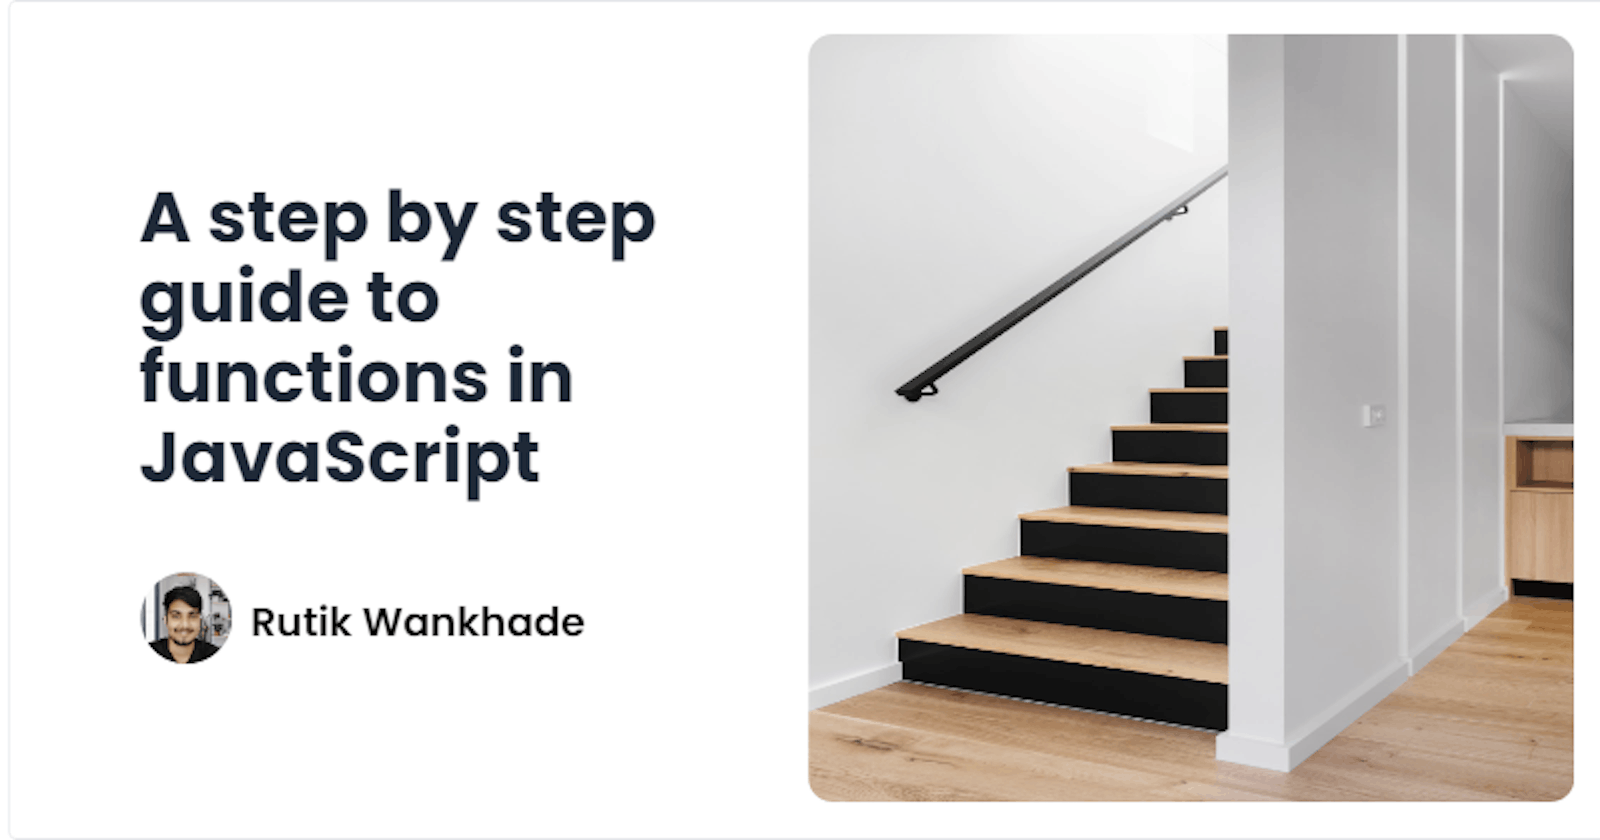 A step by step guide to functions in JavaScript